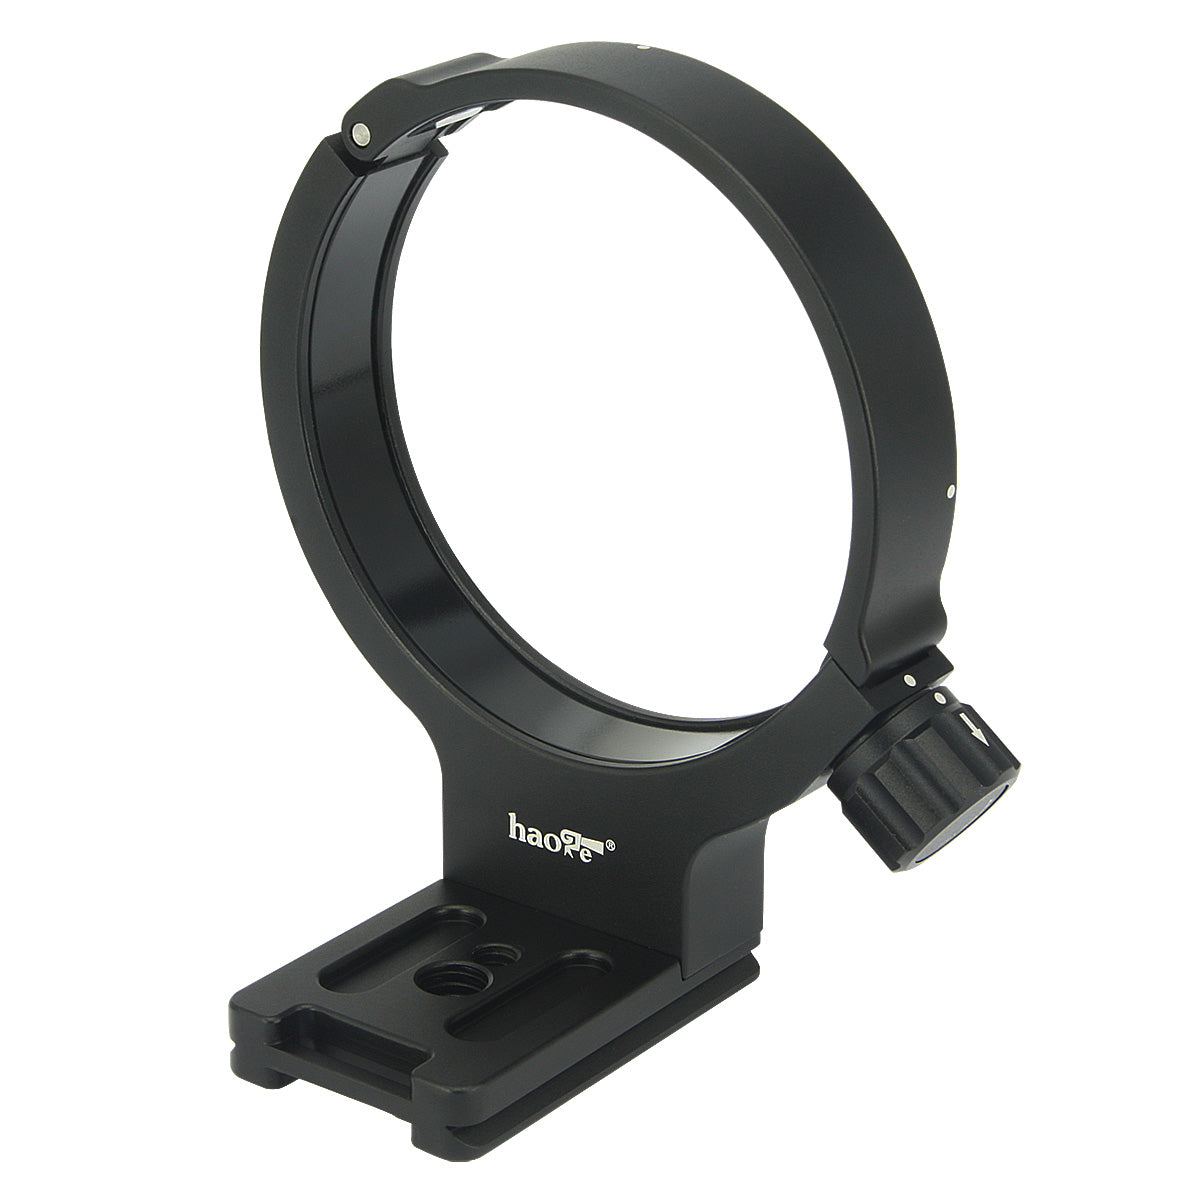 Haoge LMR-TL140 Lens Collar Replacement Foot Tripod Mount Ring Stand Base for Tamron 100-400mm f/4.5-6.3 Di VC USD A035 Lens built-in Arca Type Quick Release Plate Replace Tamron A035TM